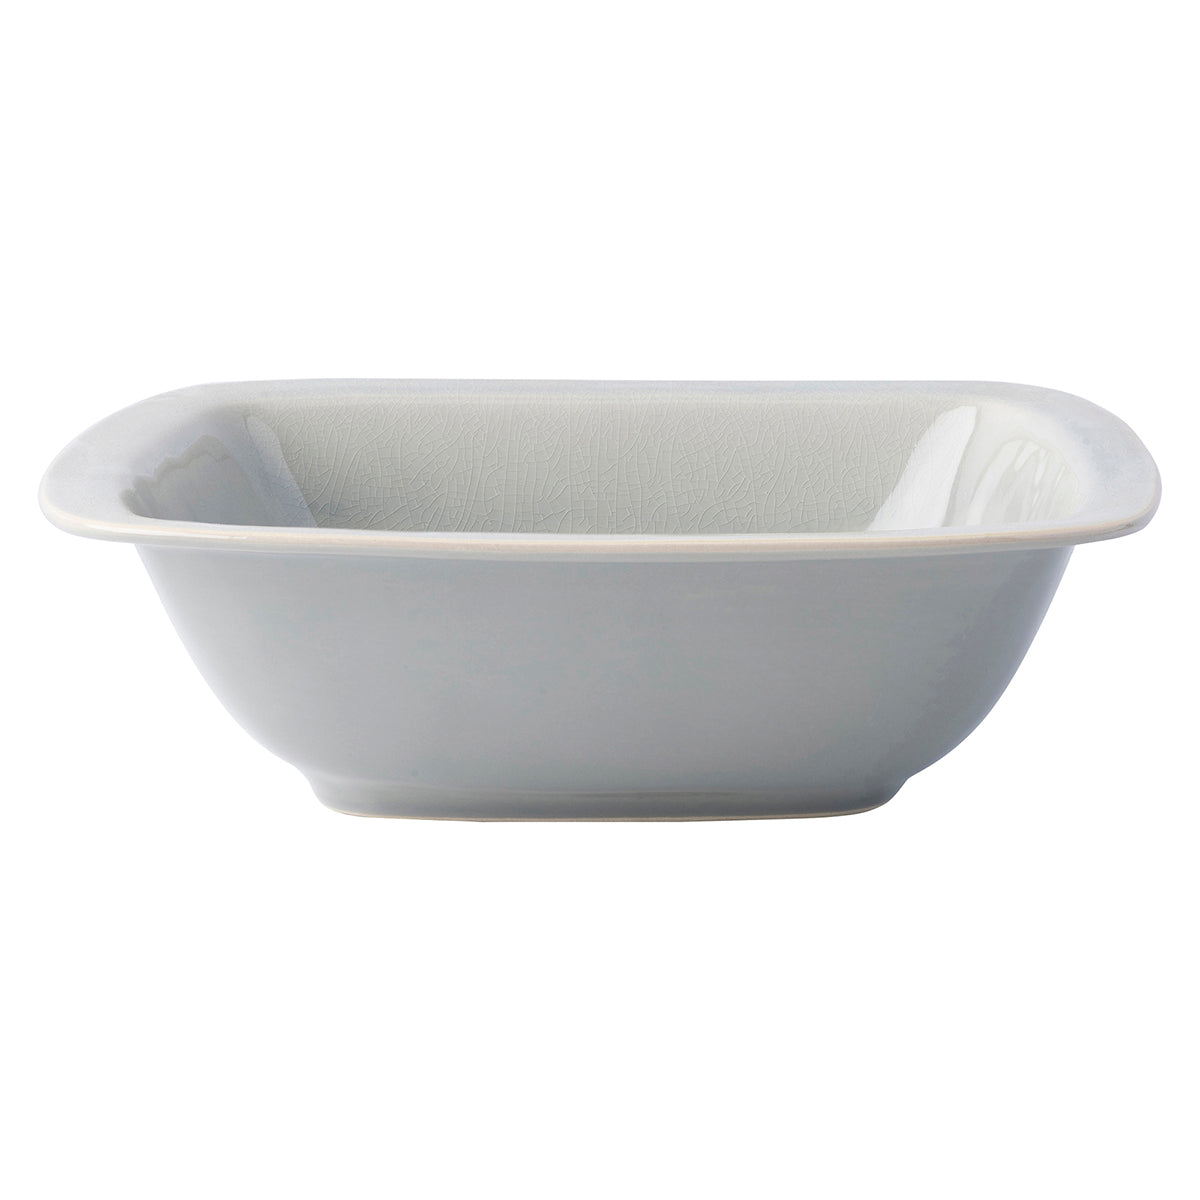 Puro Grey Mist Medium Rounded Square Serving Bowl | 2nd